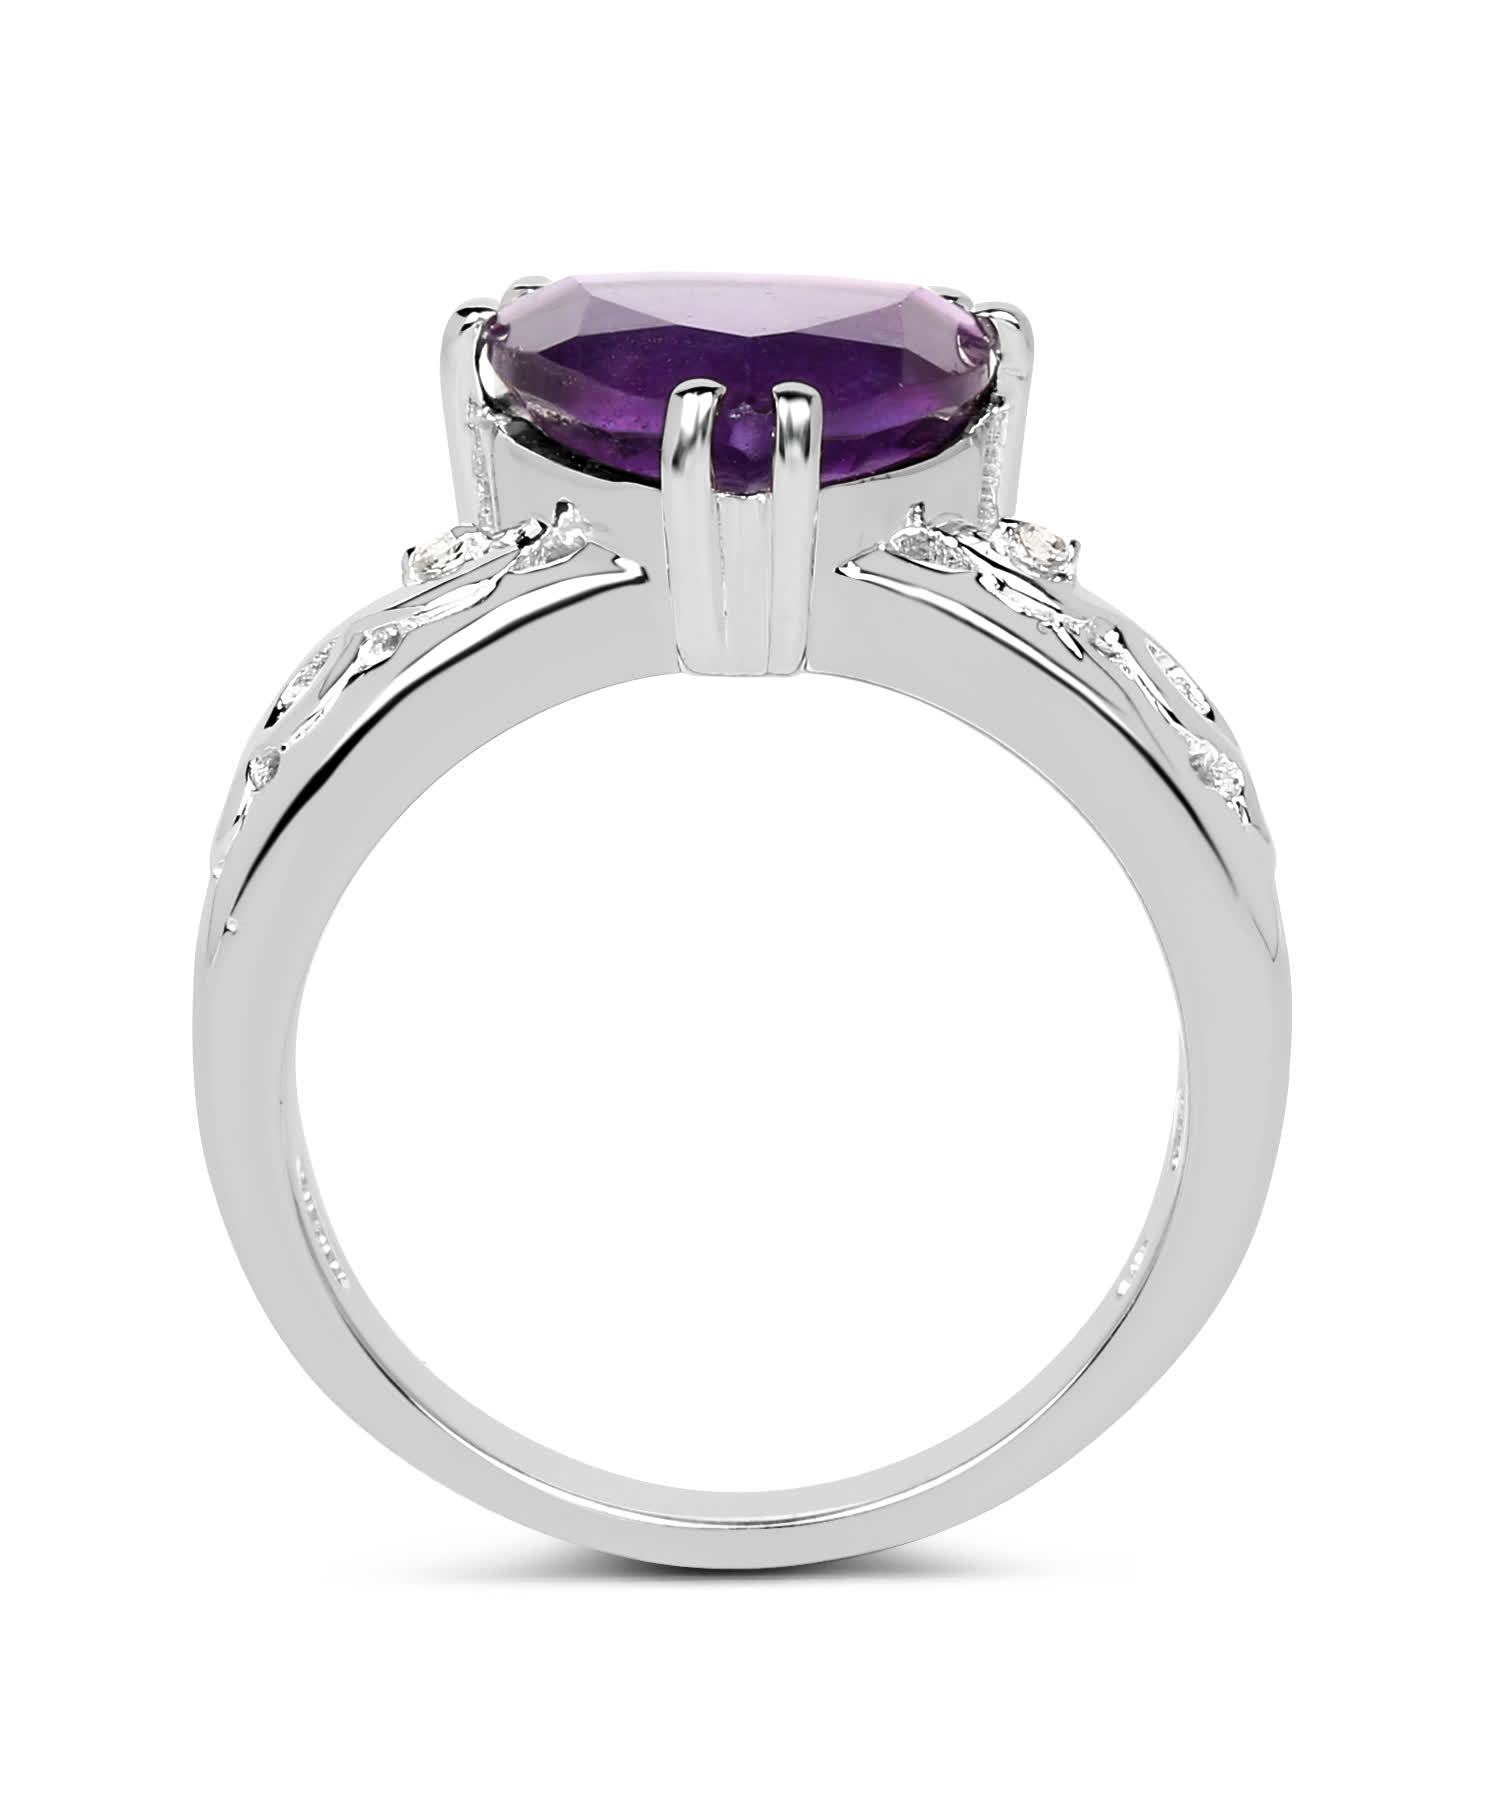 2.71ctw Natural Amethyst and Topaz Rhodium Plated 925 Sterling Silver Triangle Ring View 2